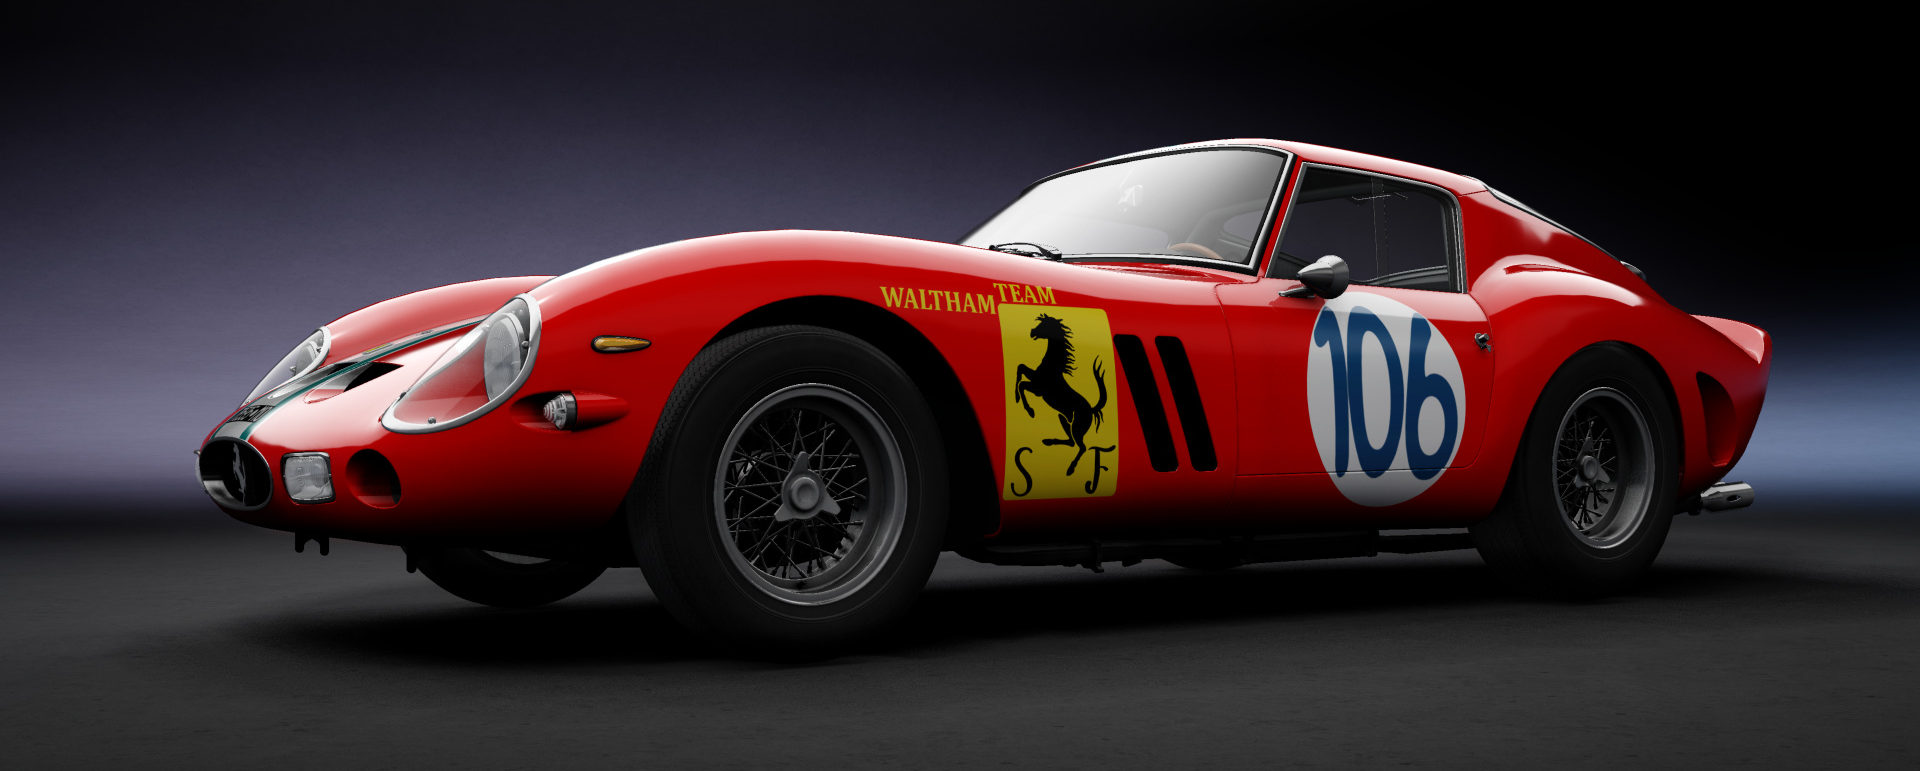 250gto106c.png